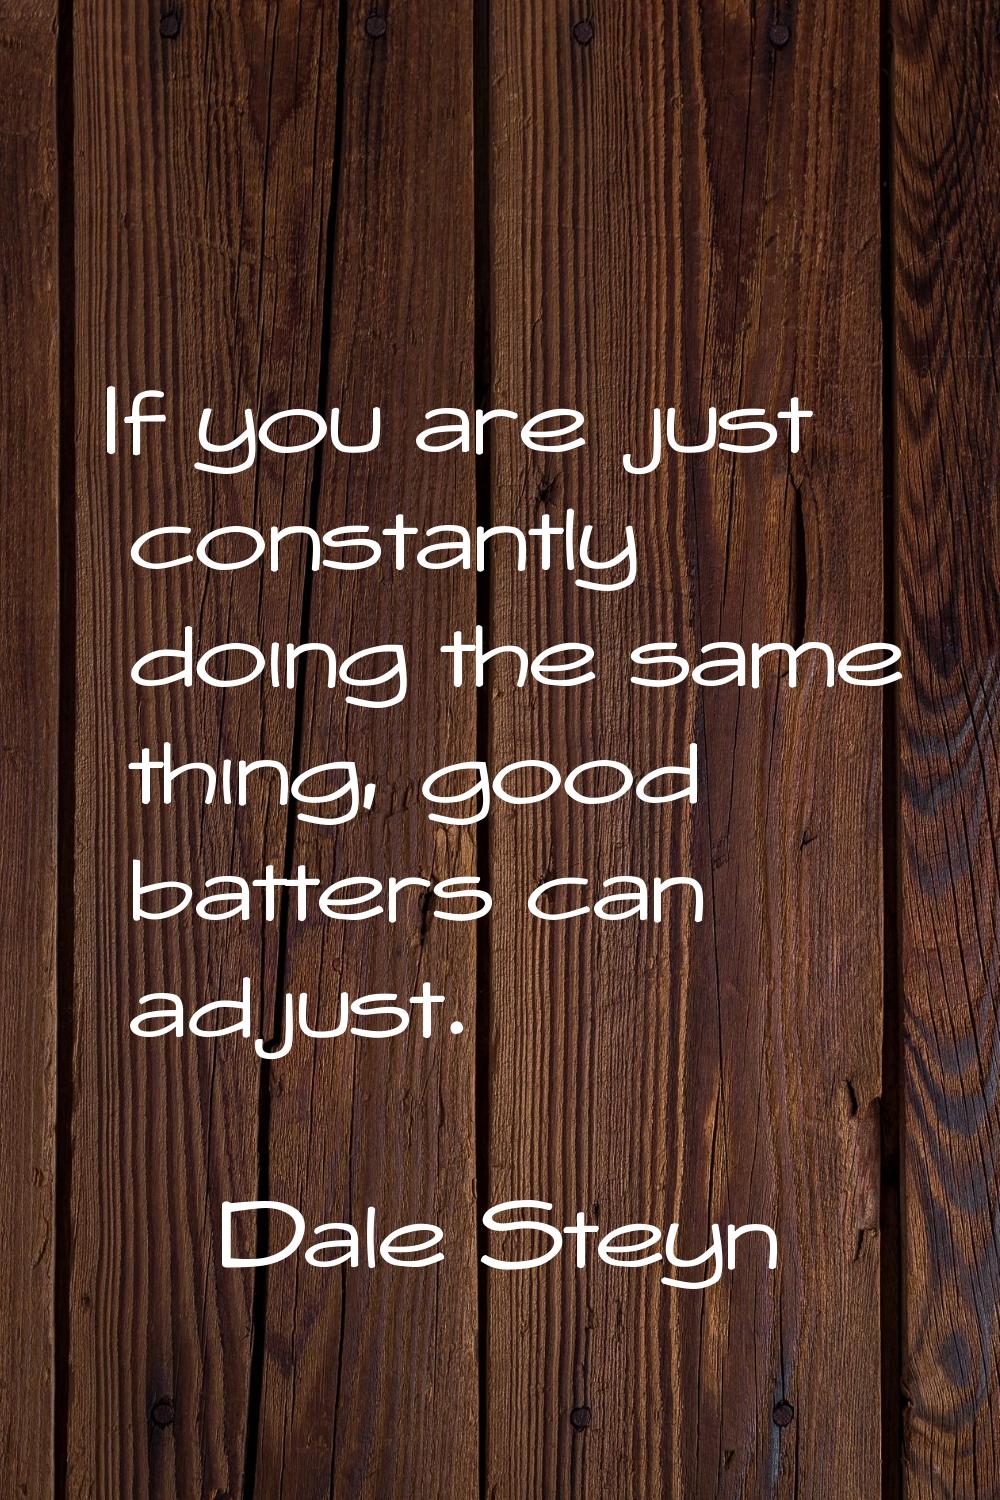 If you are just constantly doing the same thing, good batters can adjust.